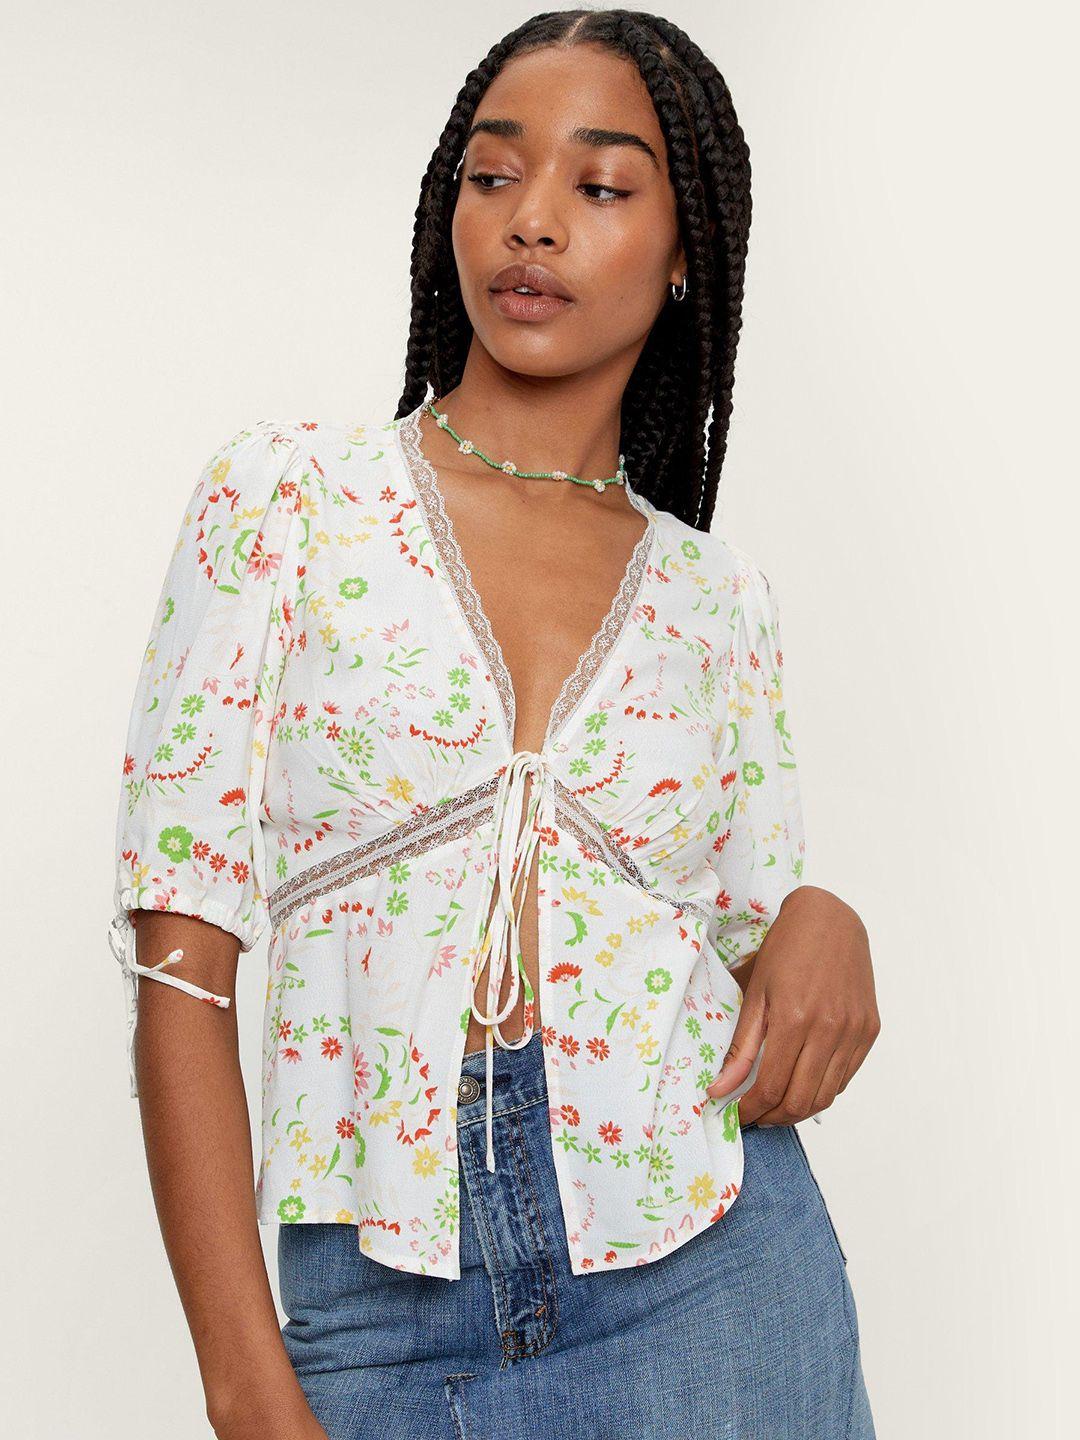 nasty gal white & green floral print top